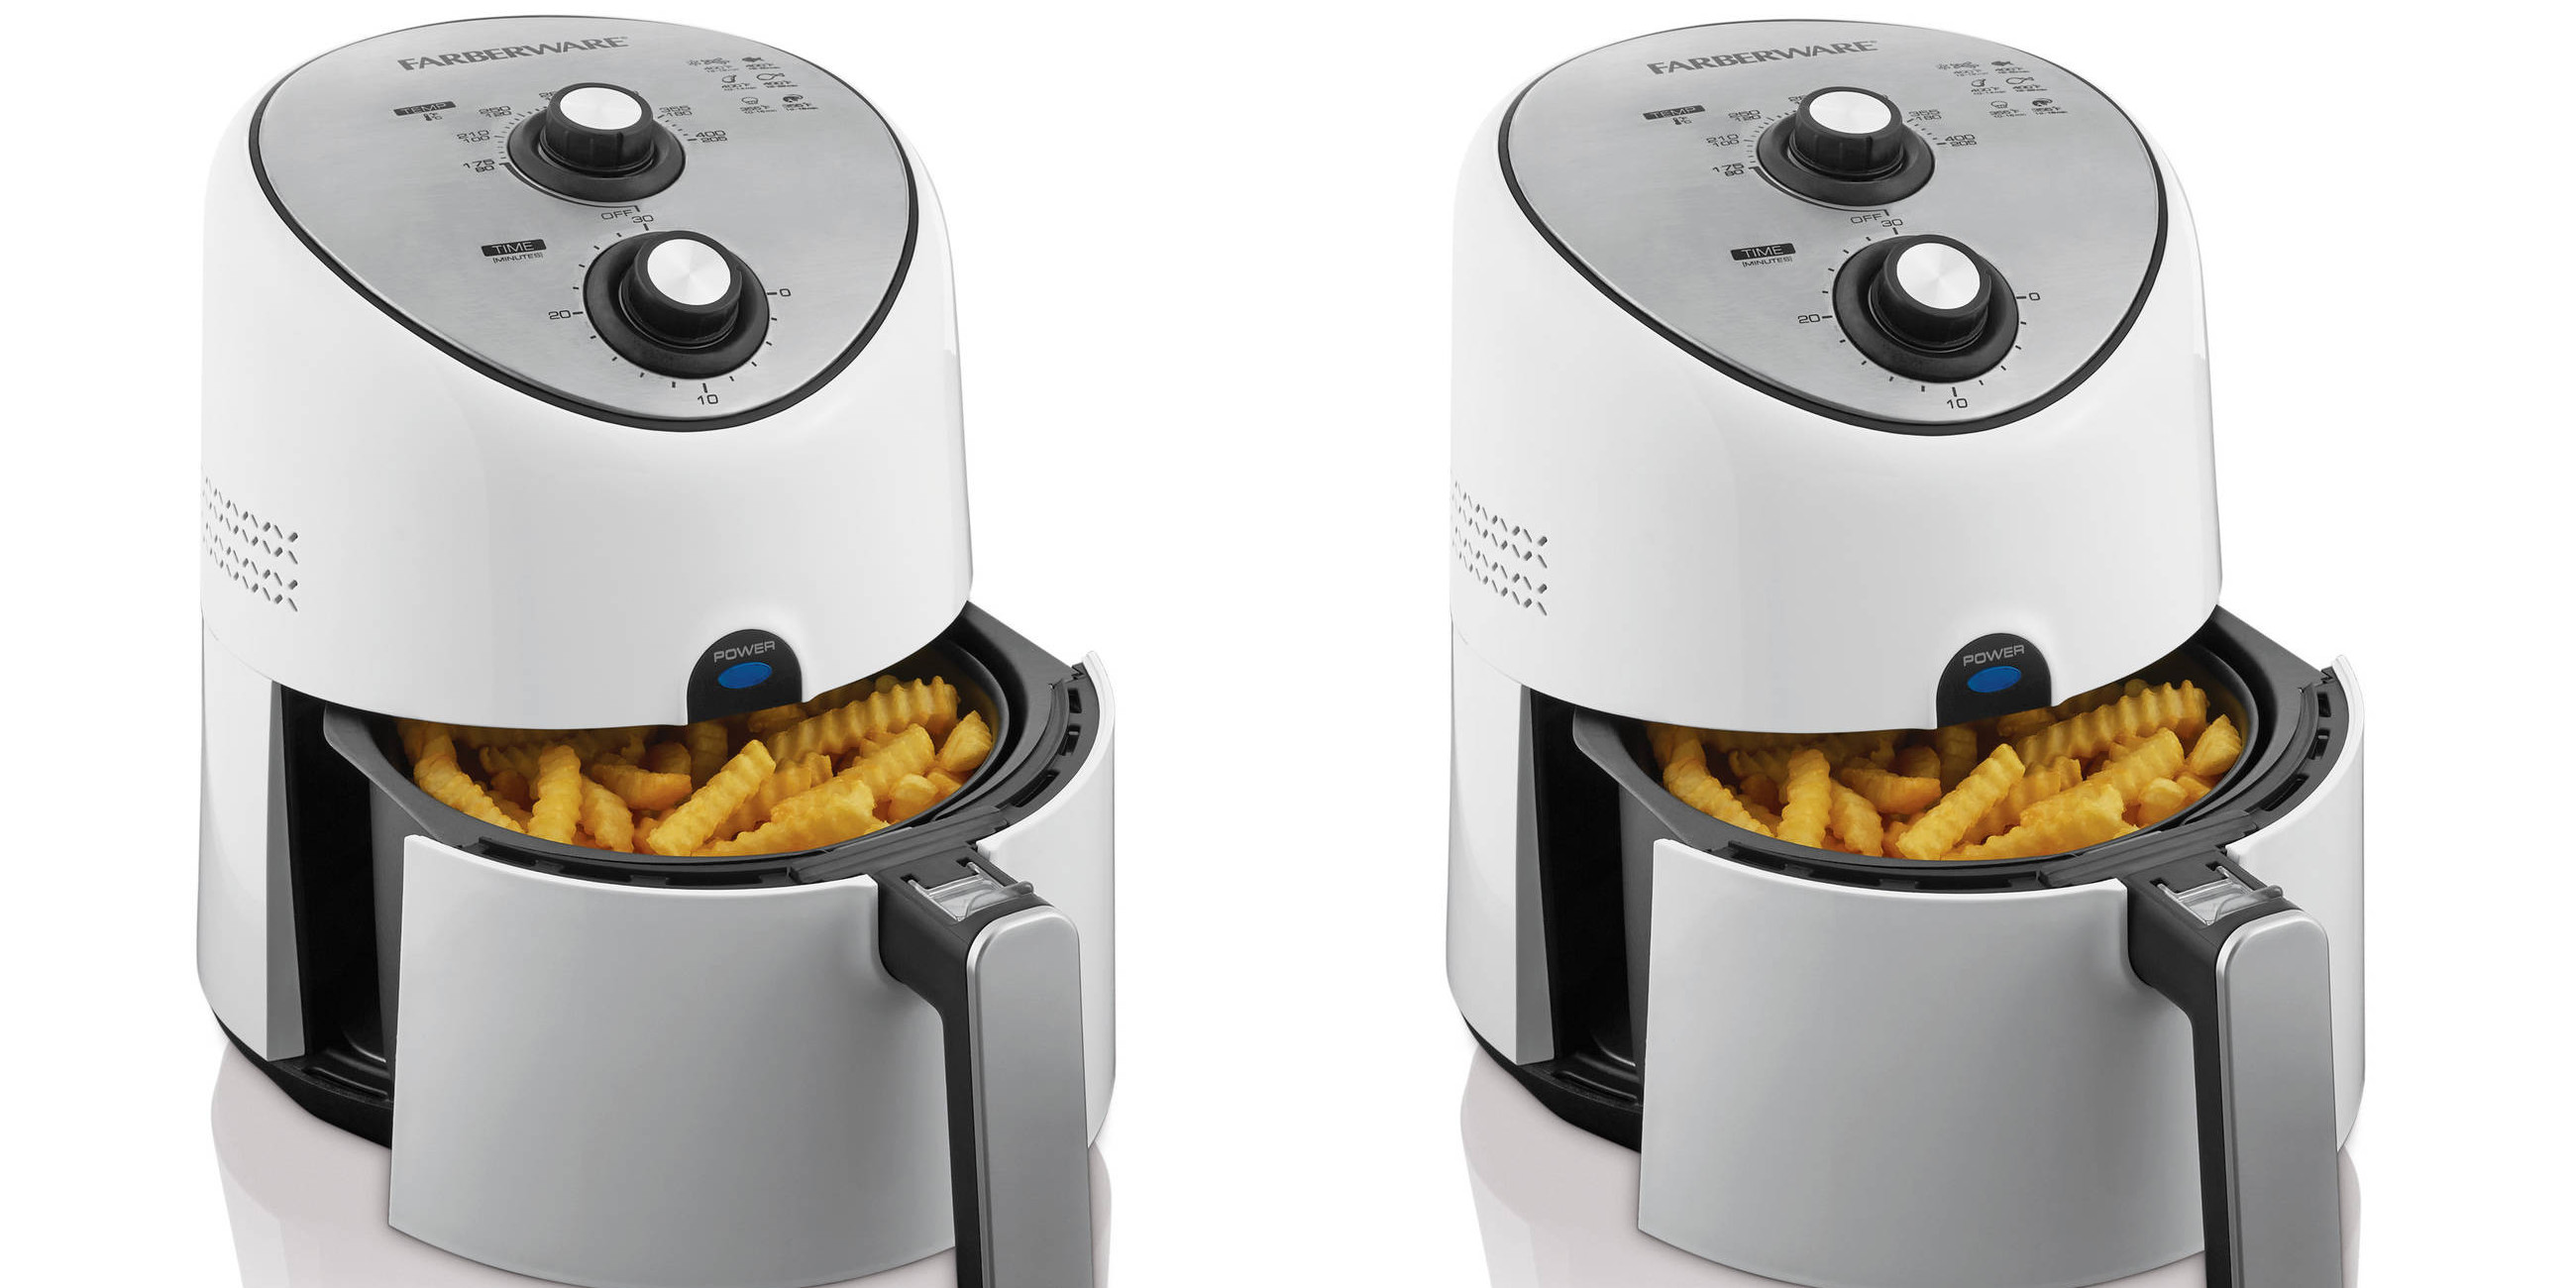 Walmart is once again offering this Farberware 2.5L Air Fryer for just $39  if you act fast